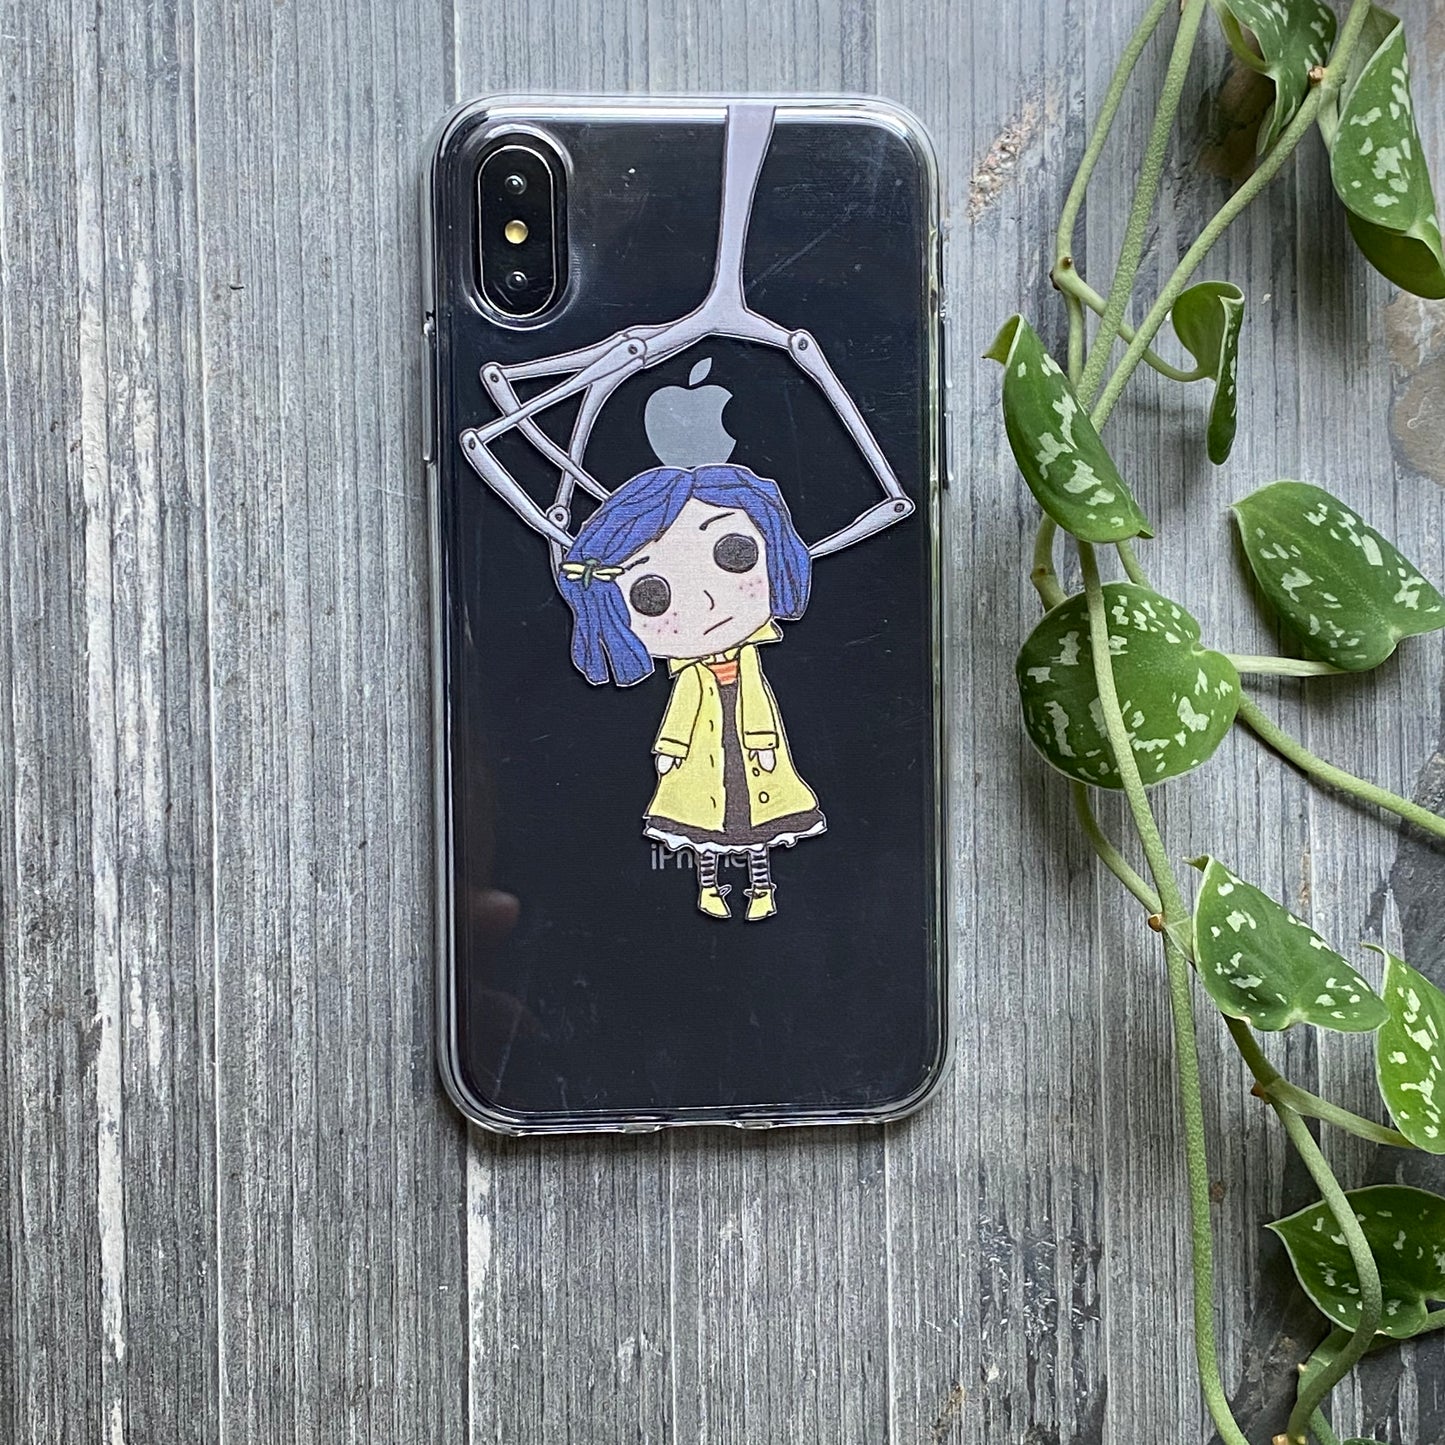 button eyes doll phone case